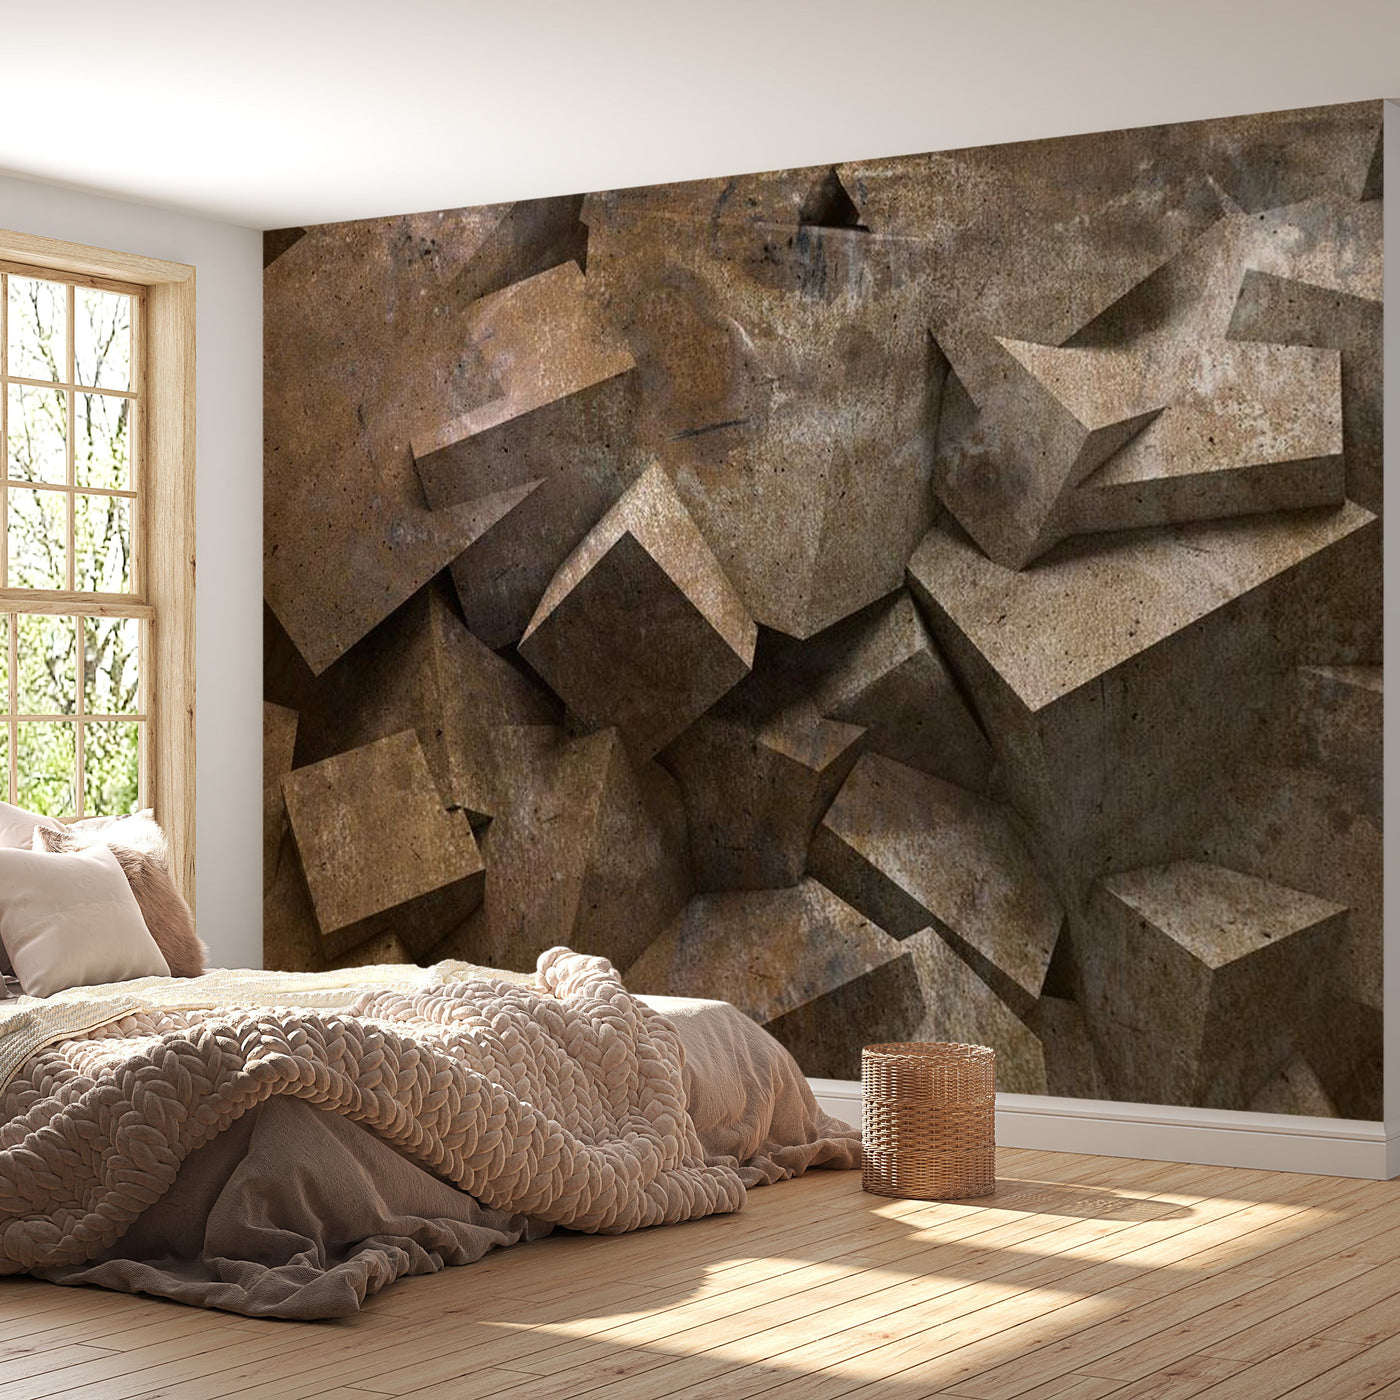 Peel & Stick Wall Mural - Concrete Blocks Copper Grey - Removable Wall Decals